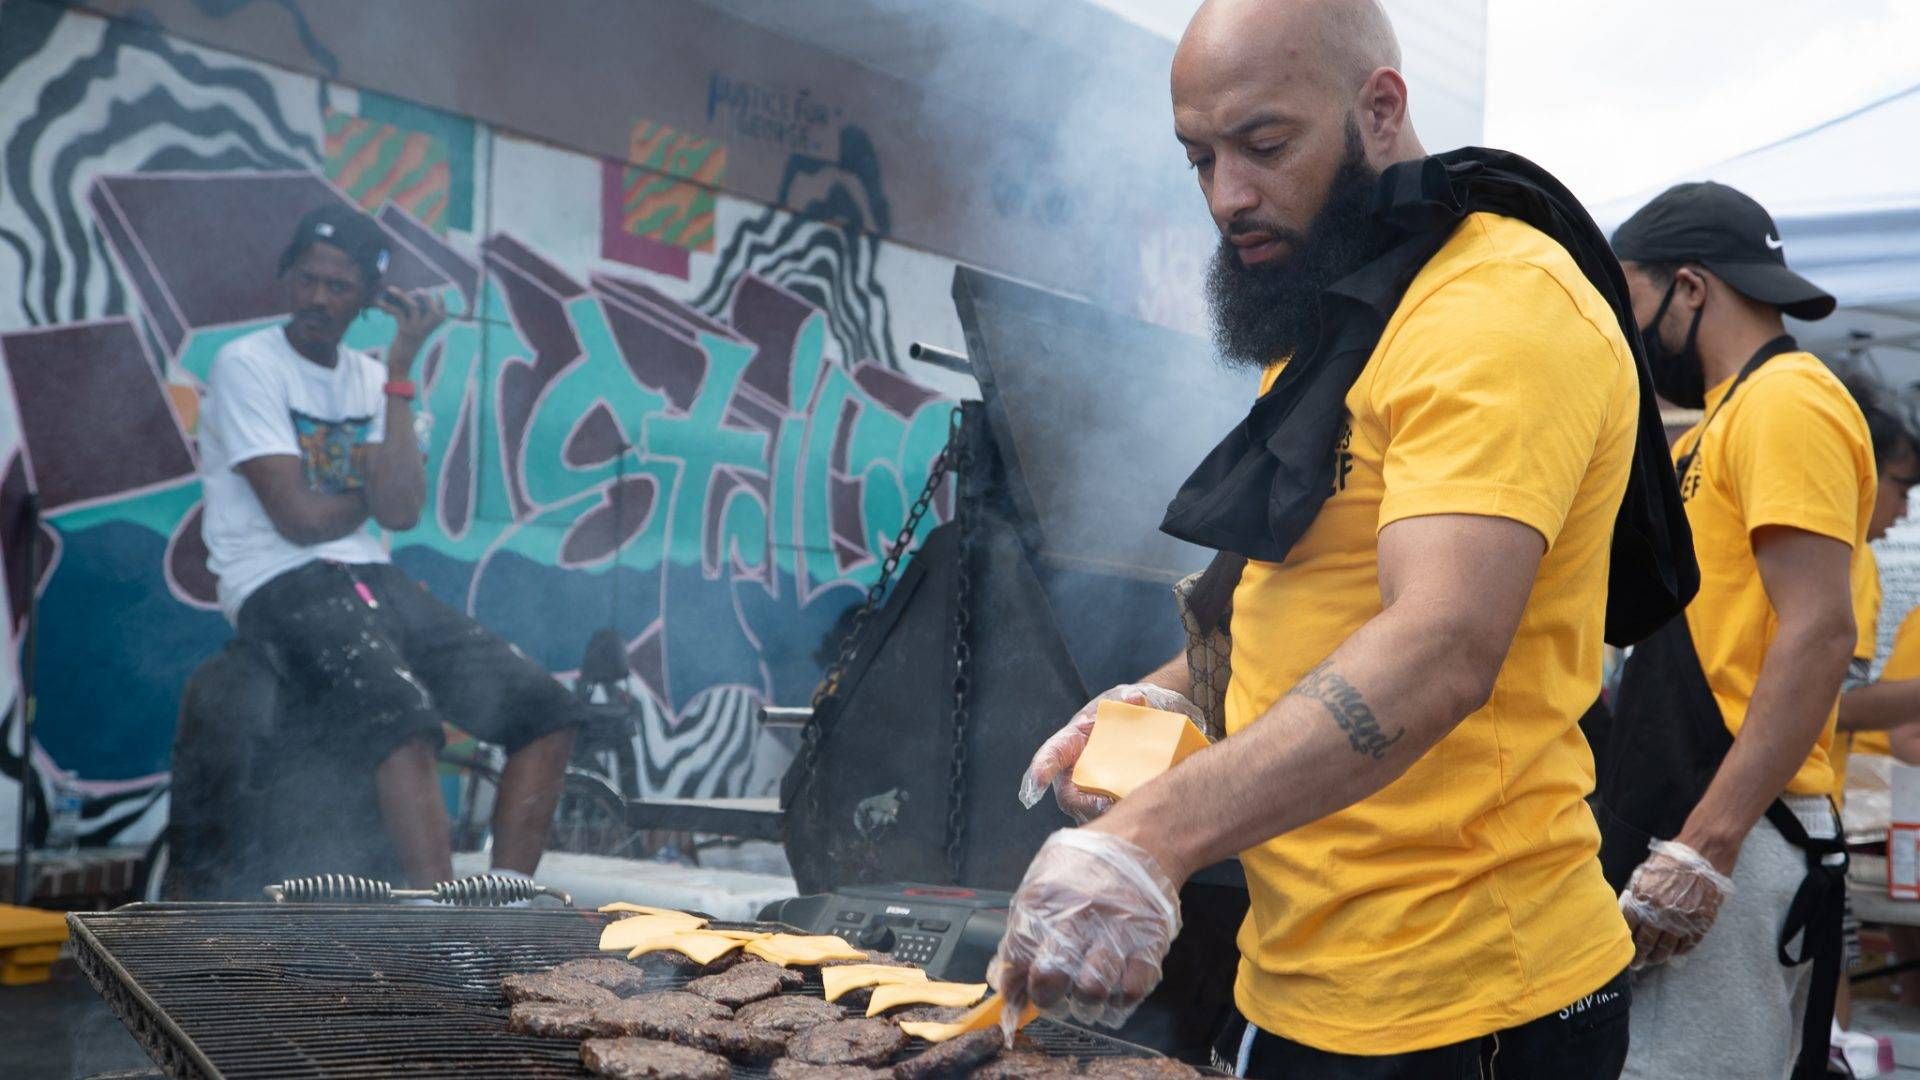 Members of the Twin Cities Relief initiative cook cheese burgers and hot dogs